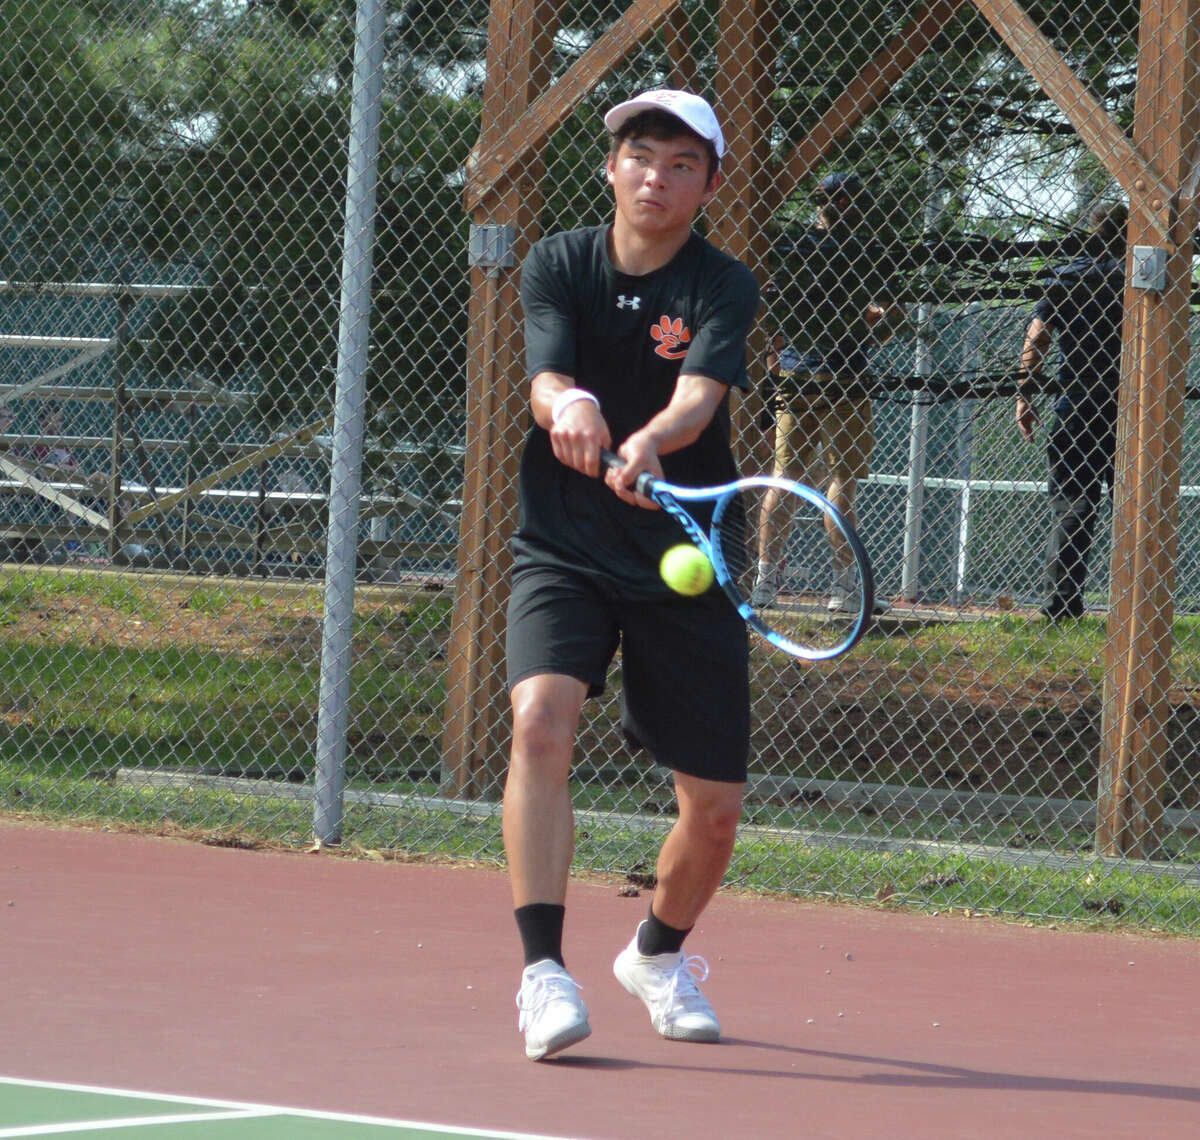 Jade Dynamic won 6-1, 6-2 in singles against Belleville West on Tuesday at the Edwardsville Tennis Center.